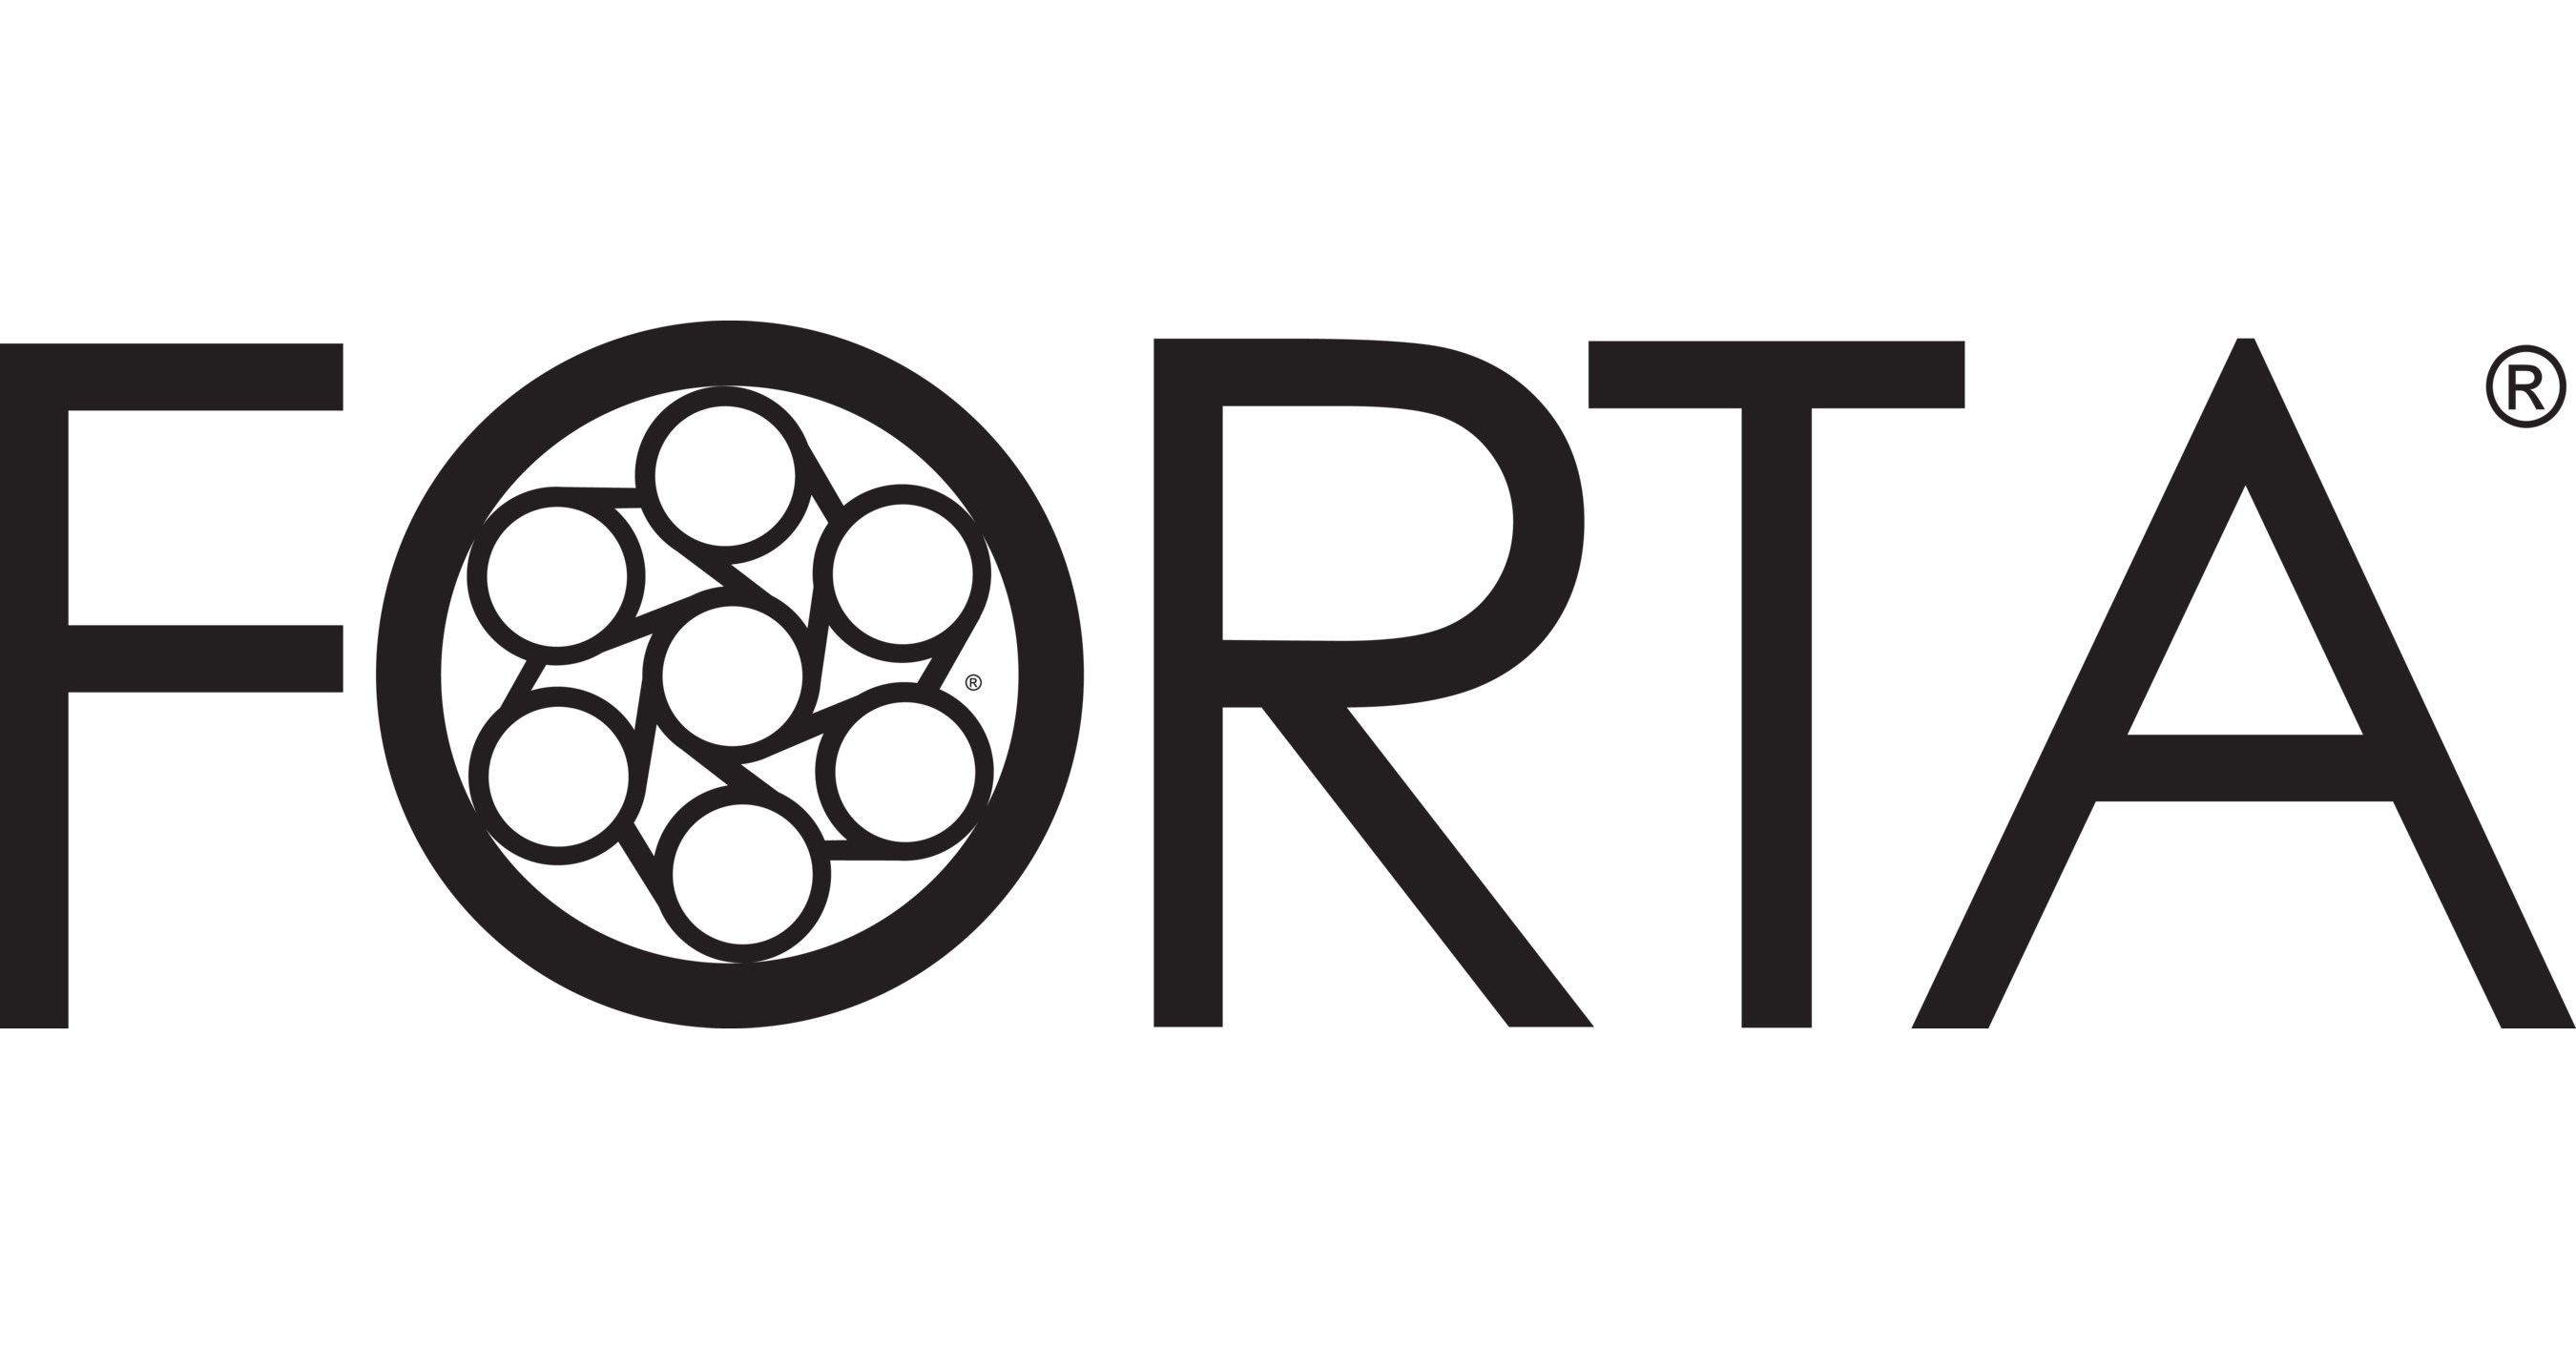 FORTA Corporation Acquires the Assets of VM Fiber Feeder, Inc.